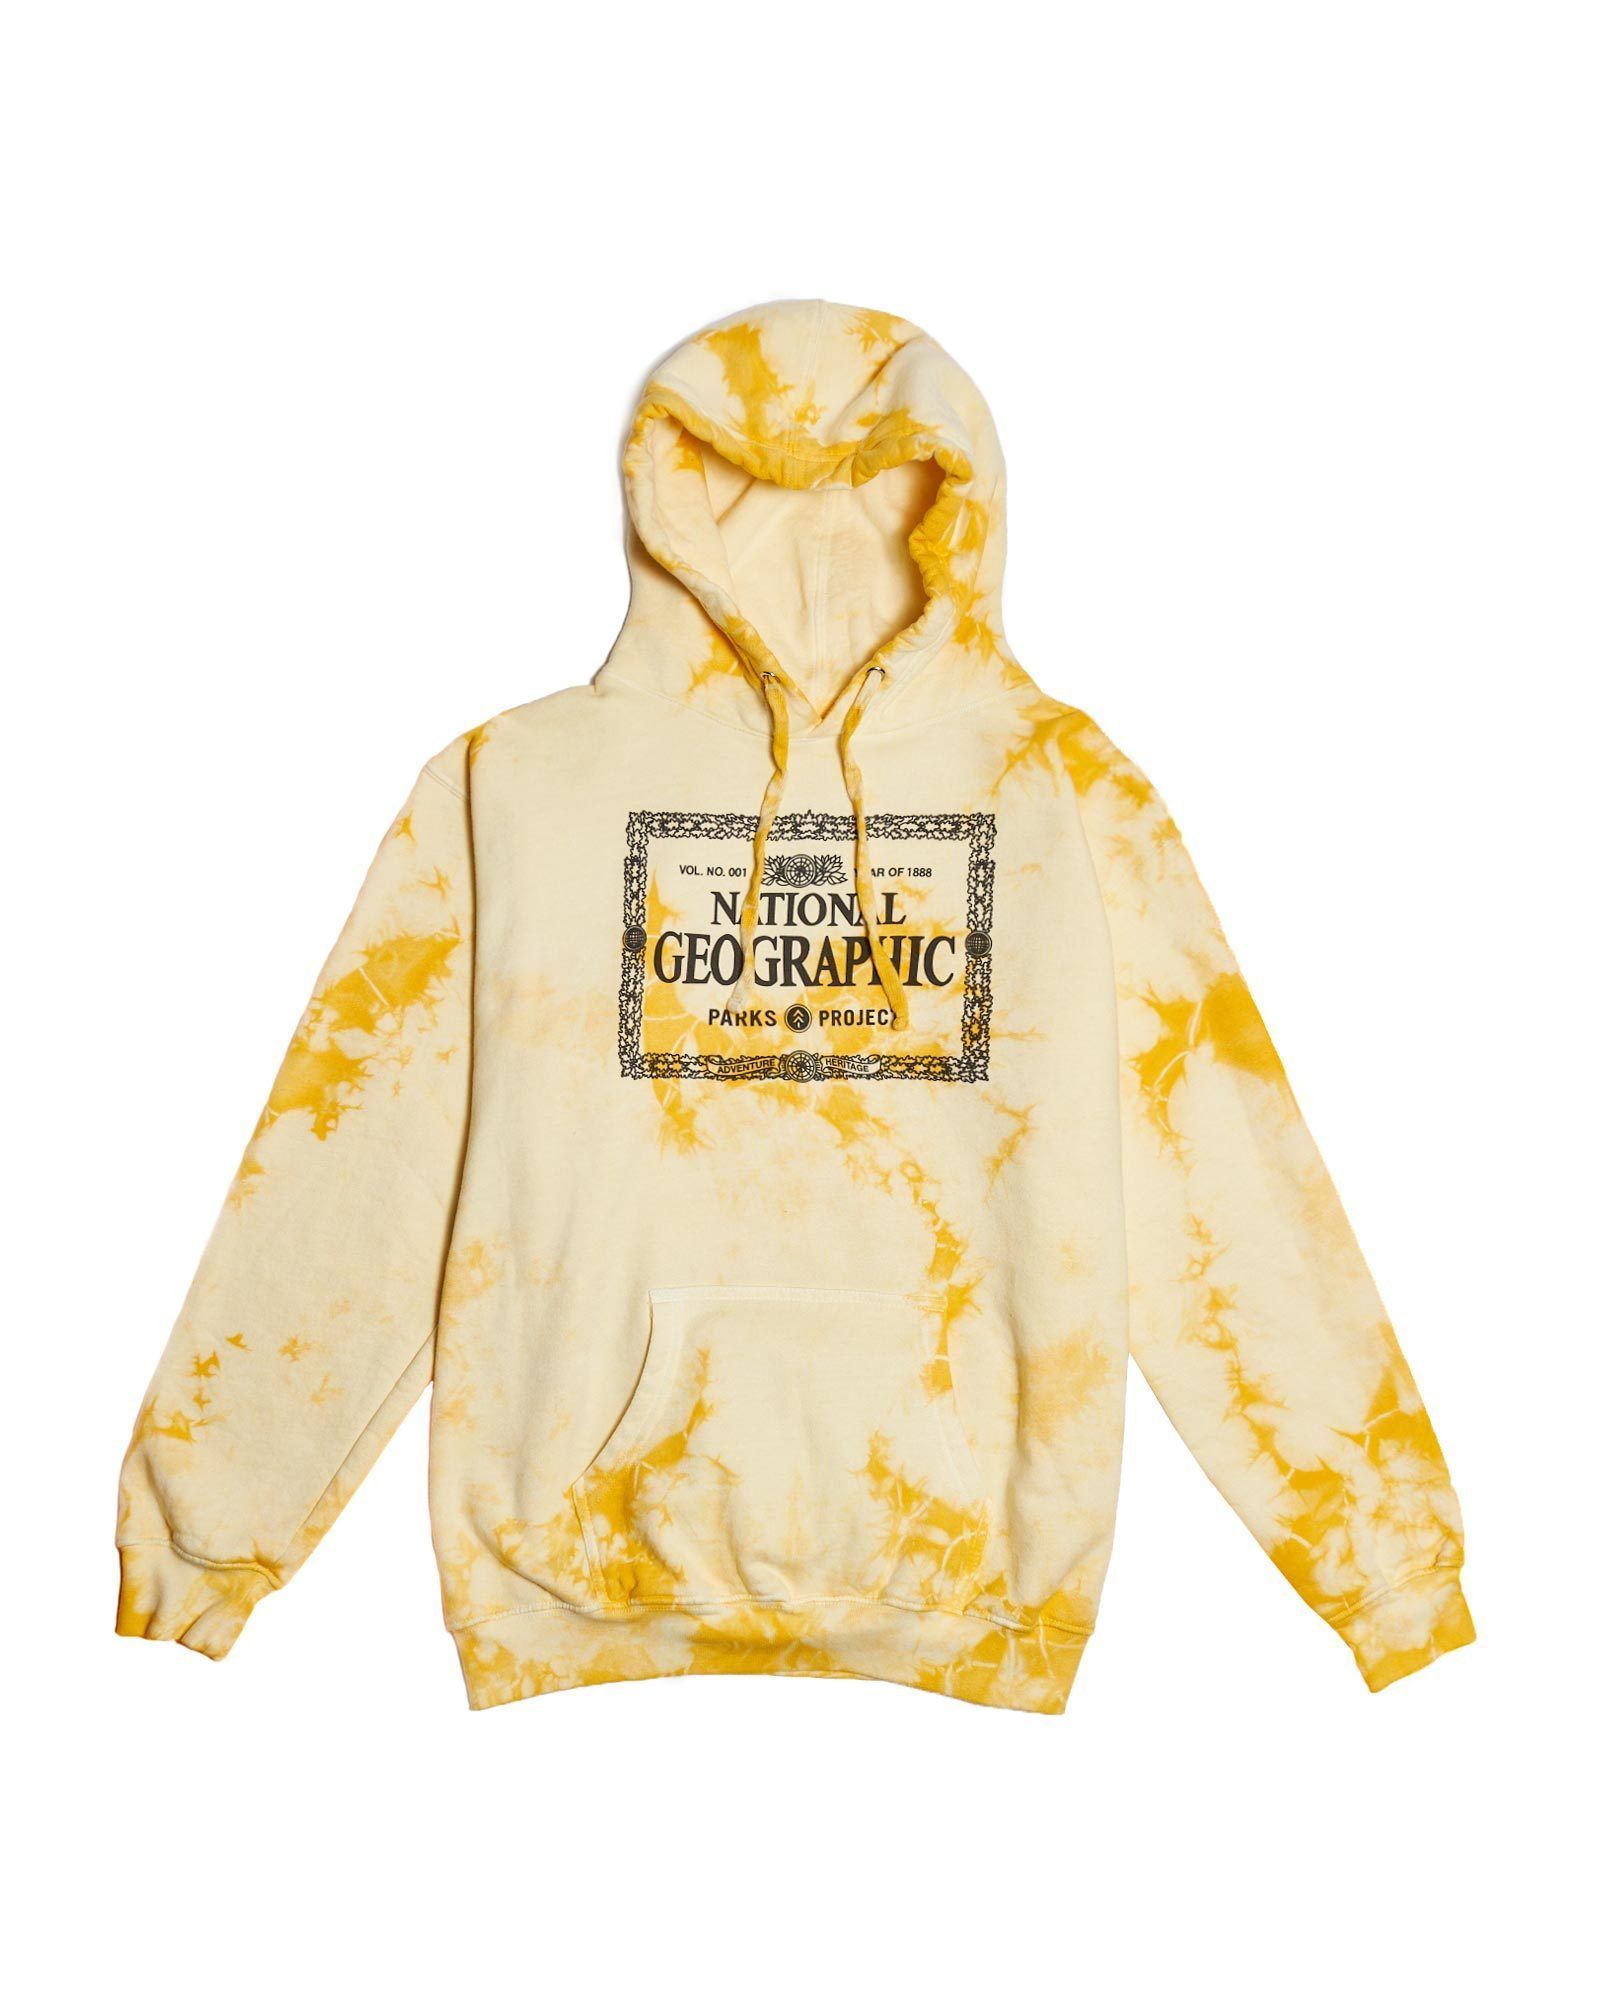 National Geographic x Parks Project Legacy Tie Dye Hoodie